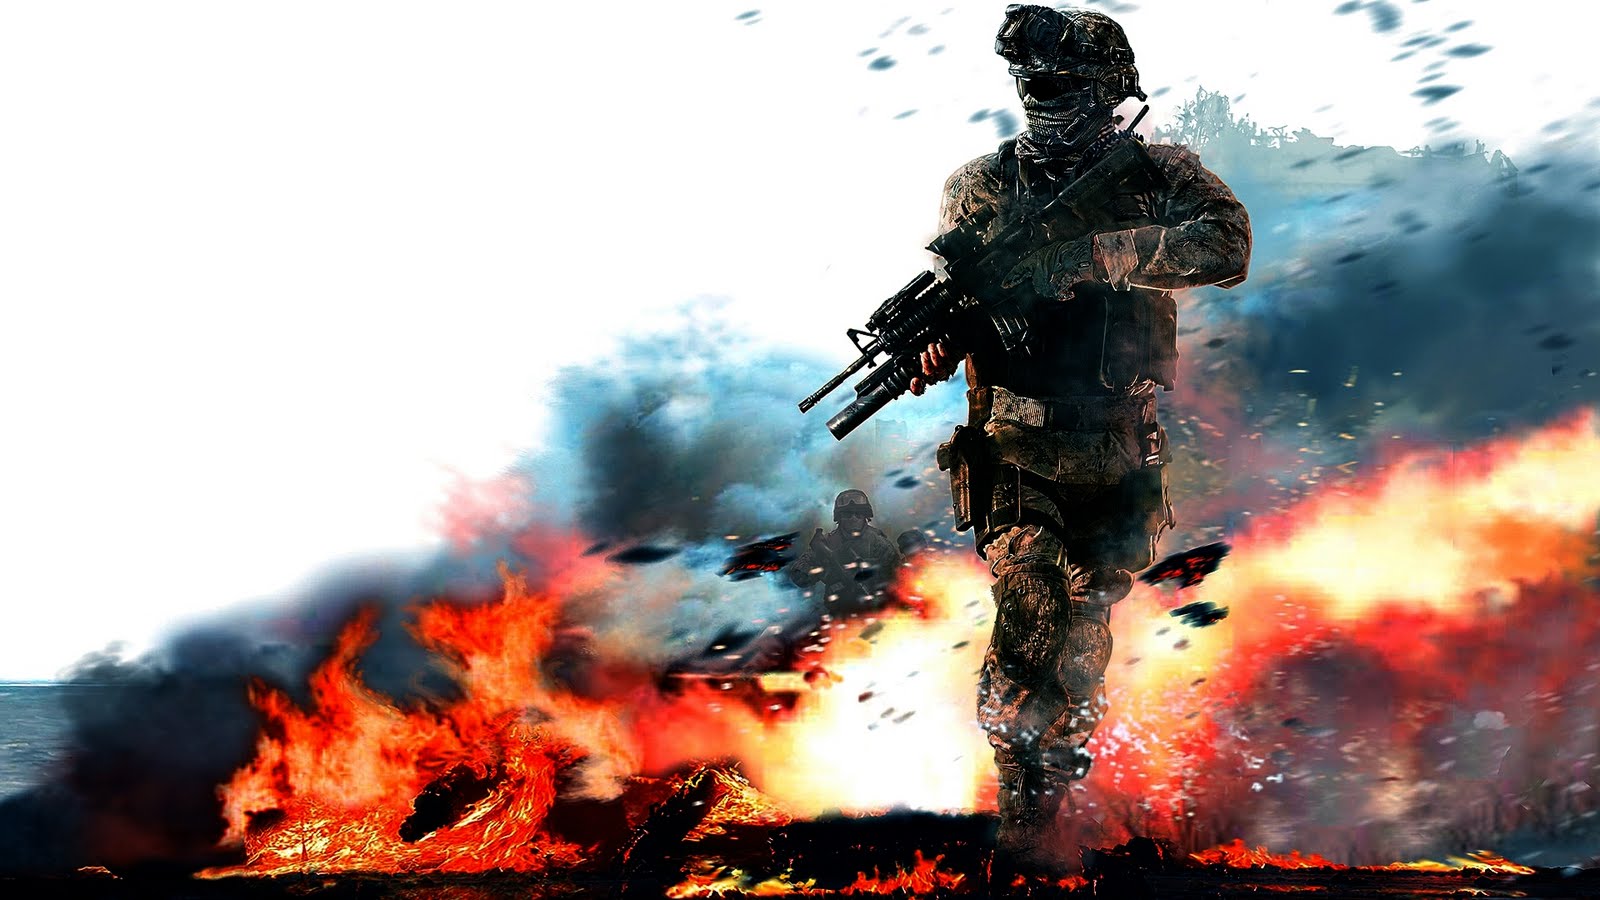 Mw2 Wallpaper HD Submited Image